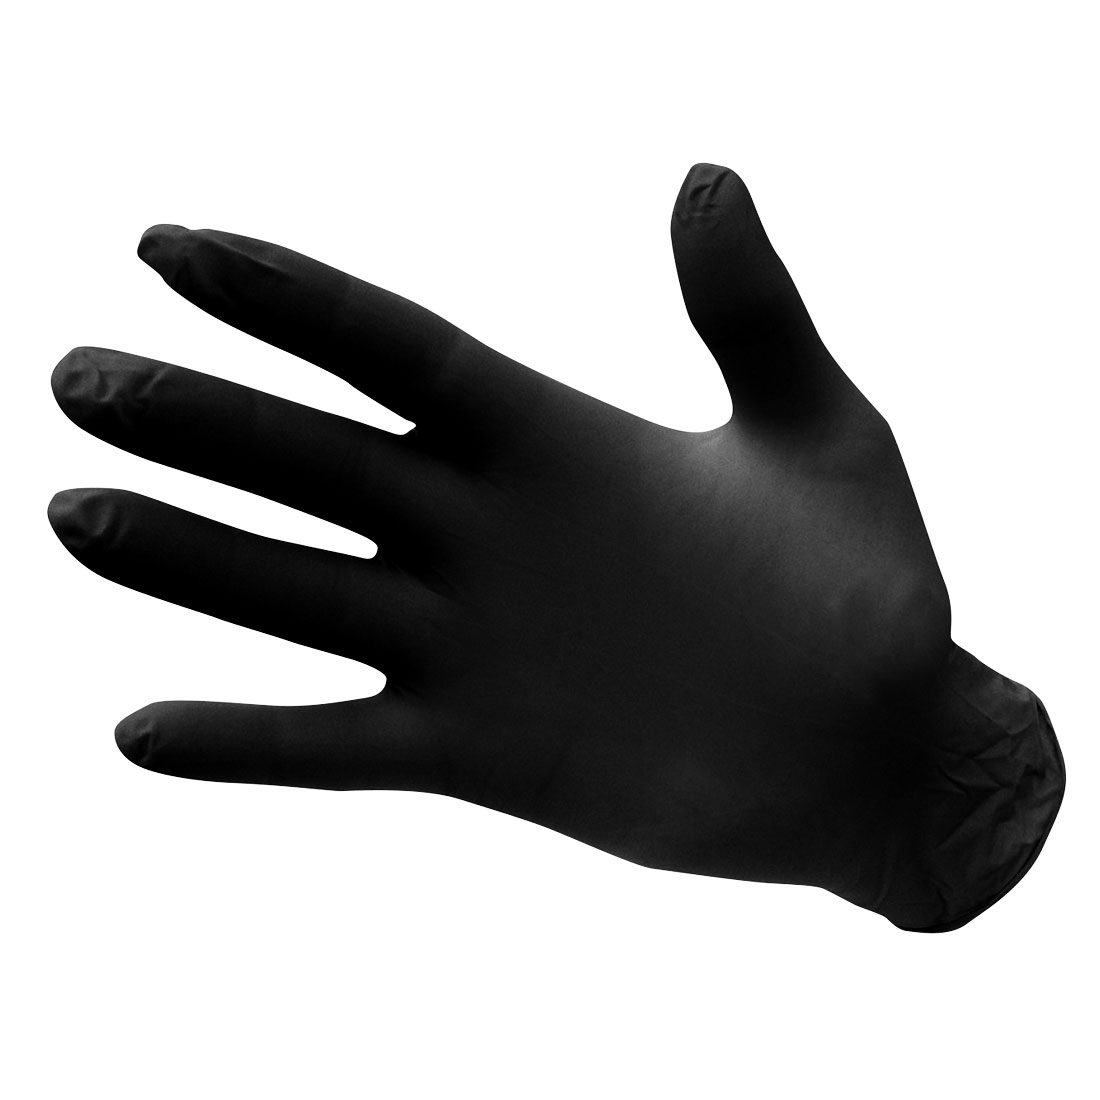 HAND PROTECTION, Disposable Gloves